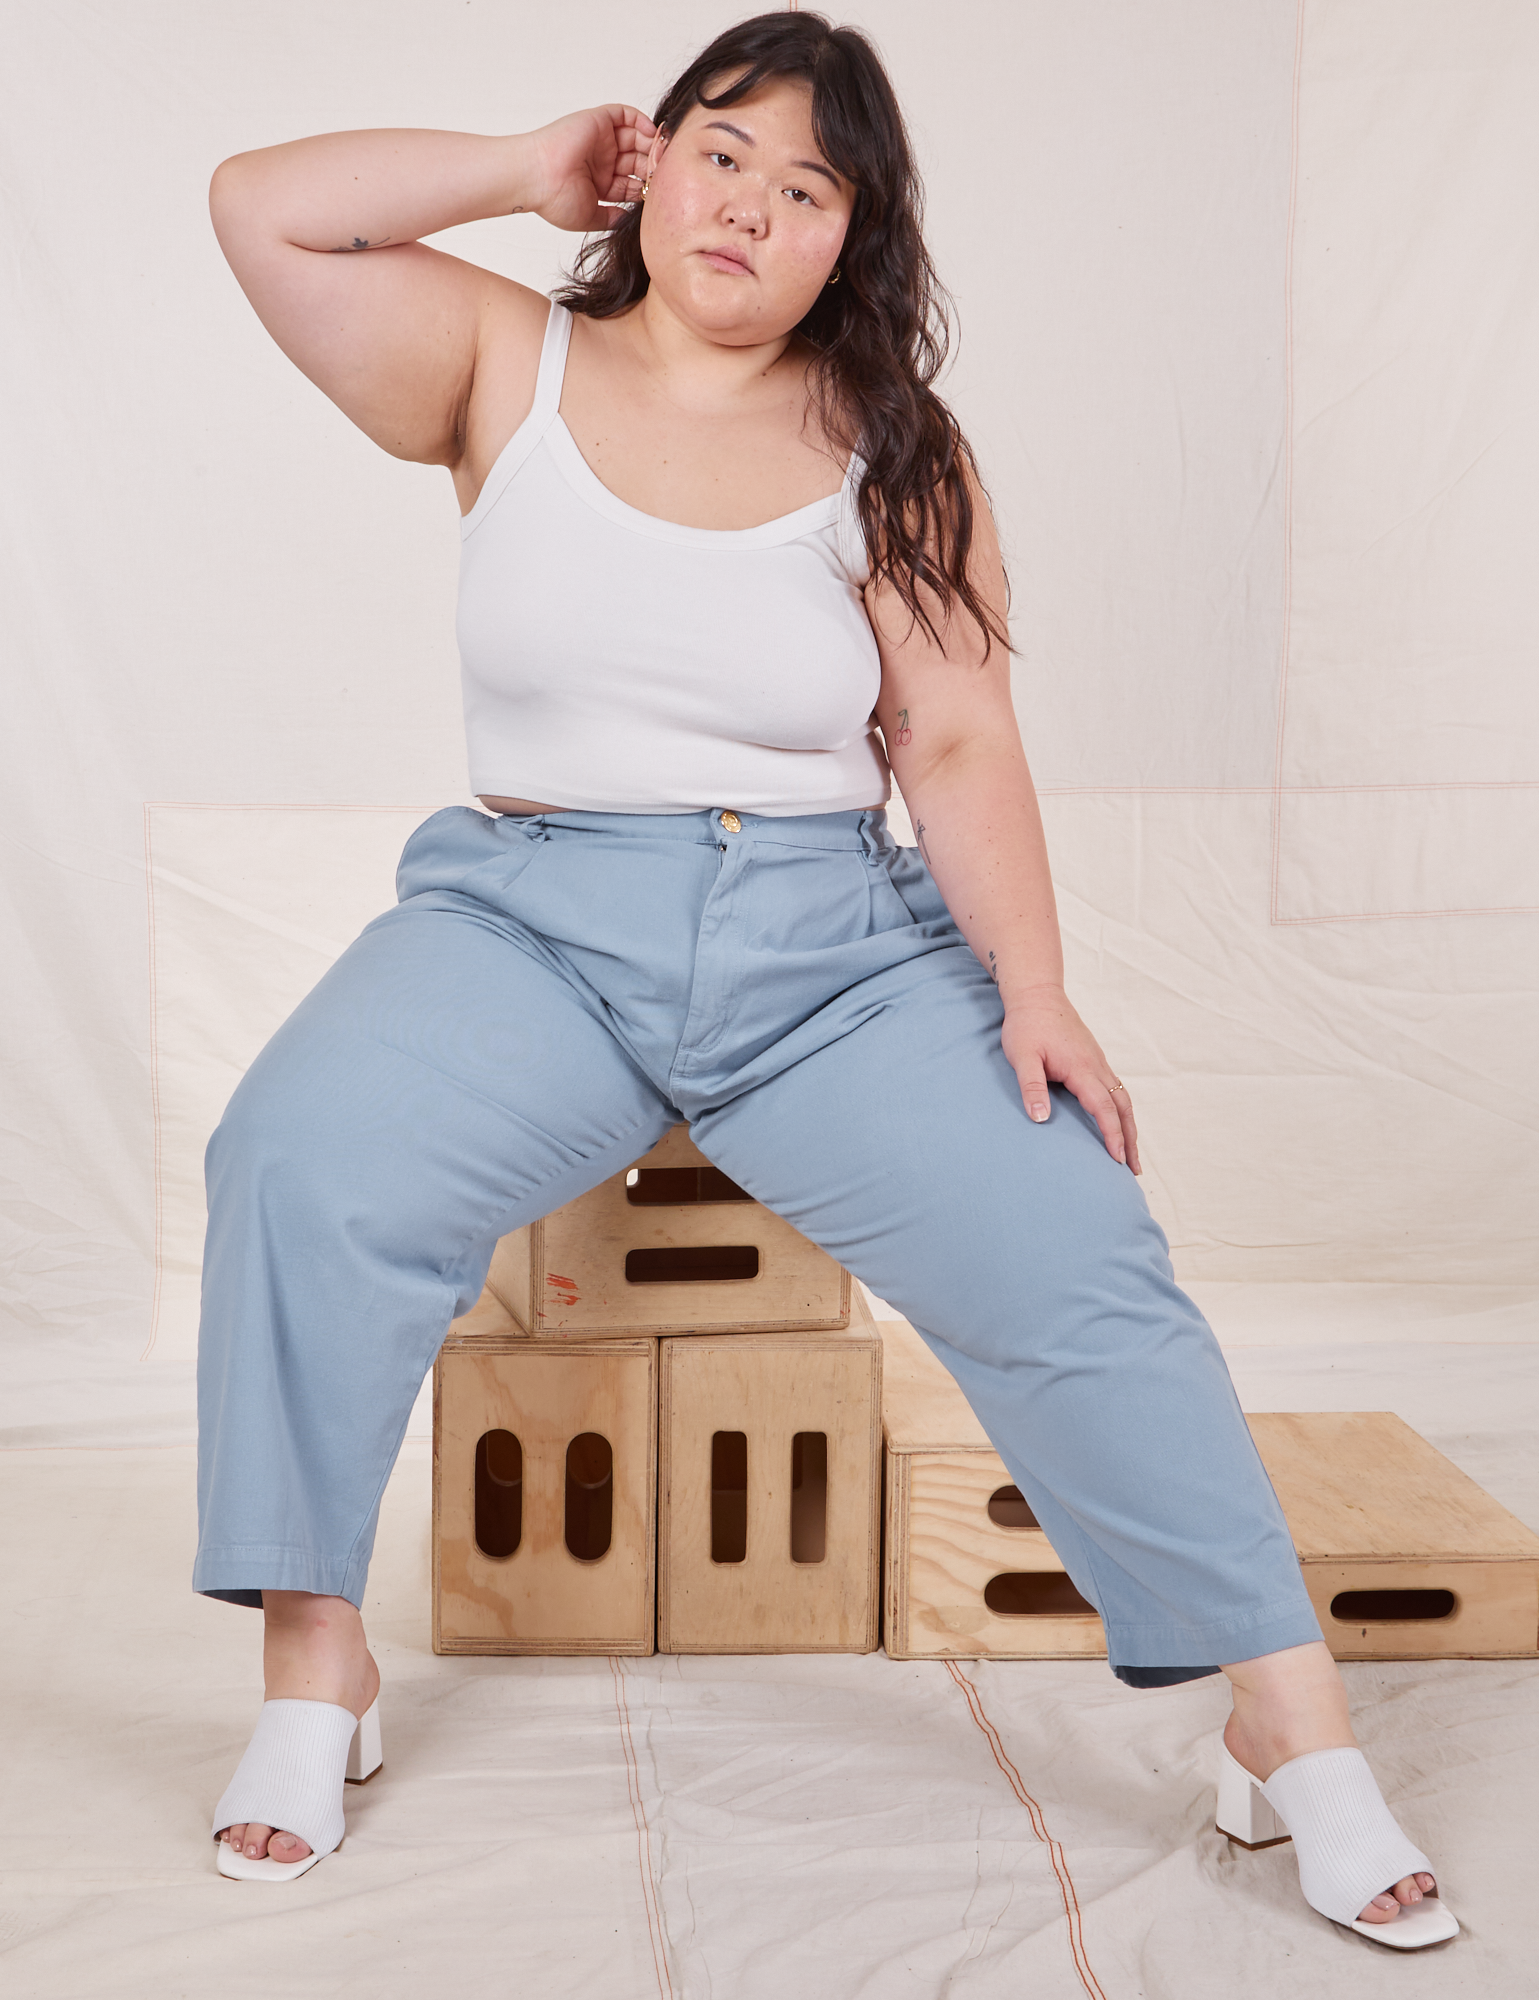 Ashley is wearing Heavyweight Trousers in Periwinkle and vintage off-white Cropped Cami